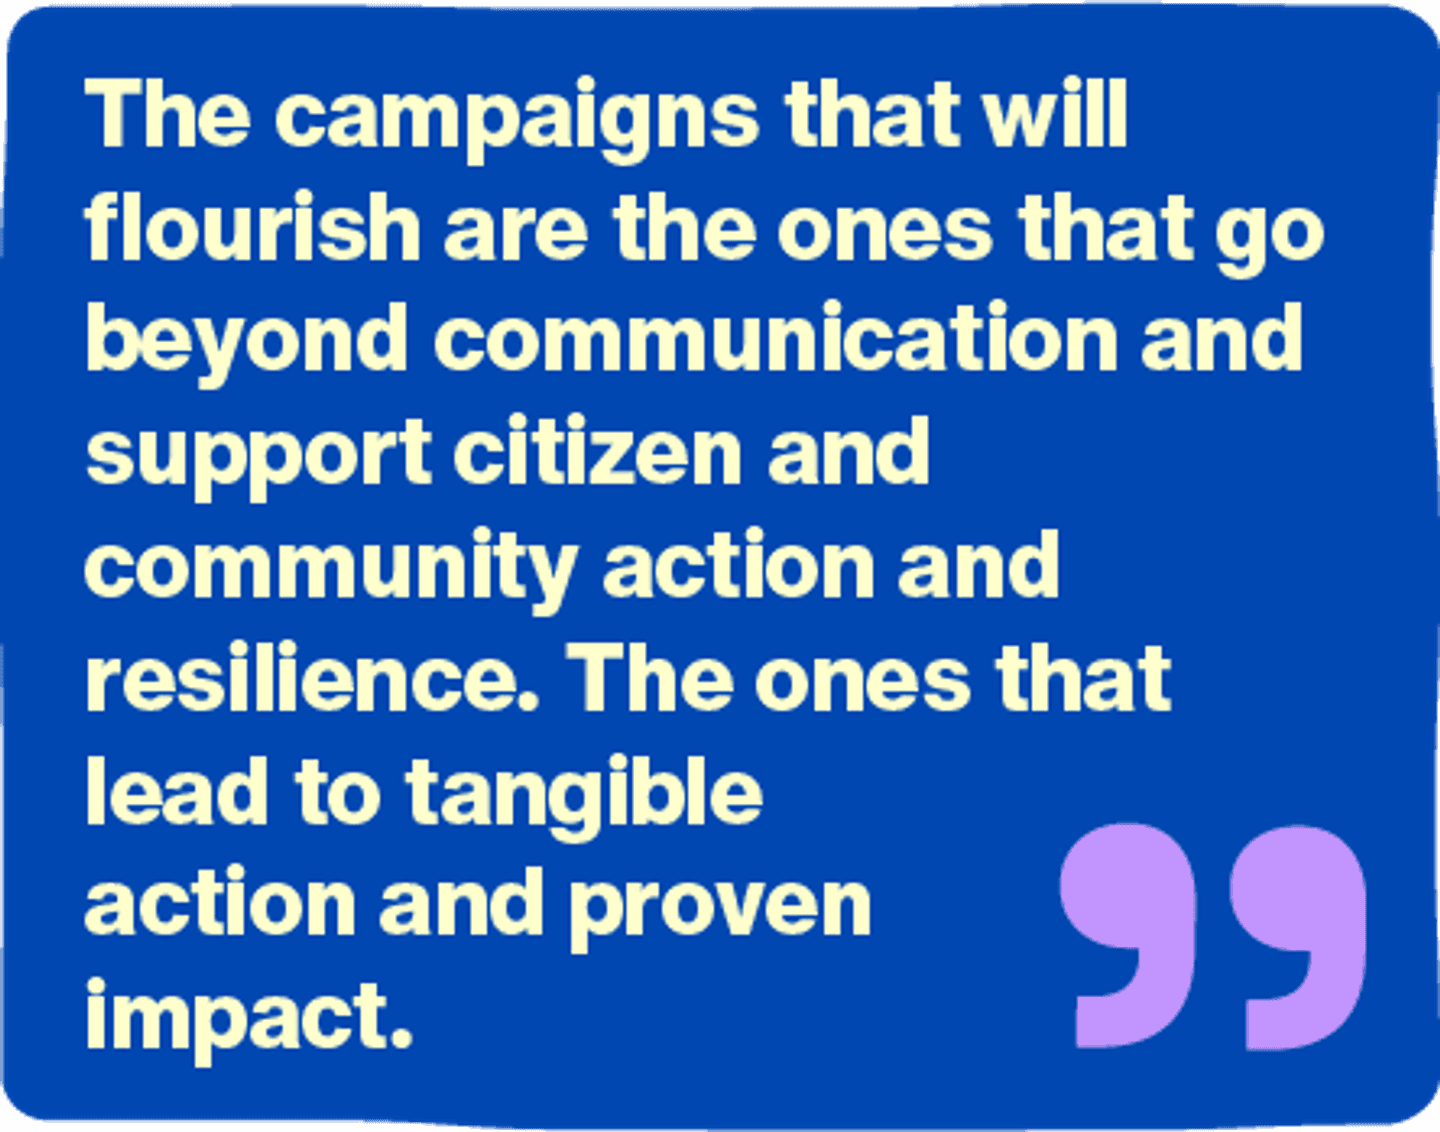 The campaigns that will flourish are the ones that go beyond communication and support citizen and community action and resilience. The ones that lead to tangible action and proven impact.